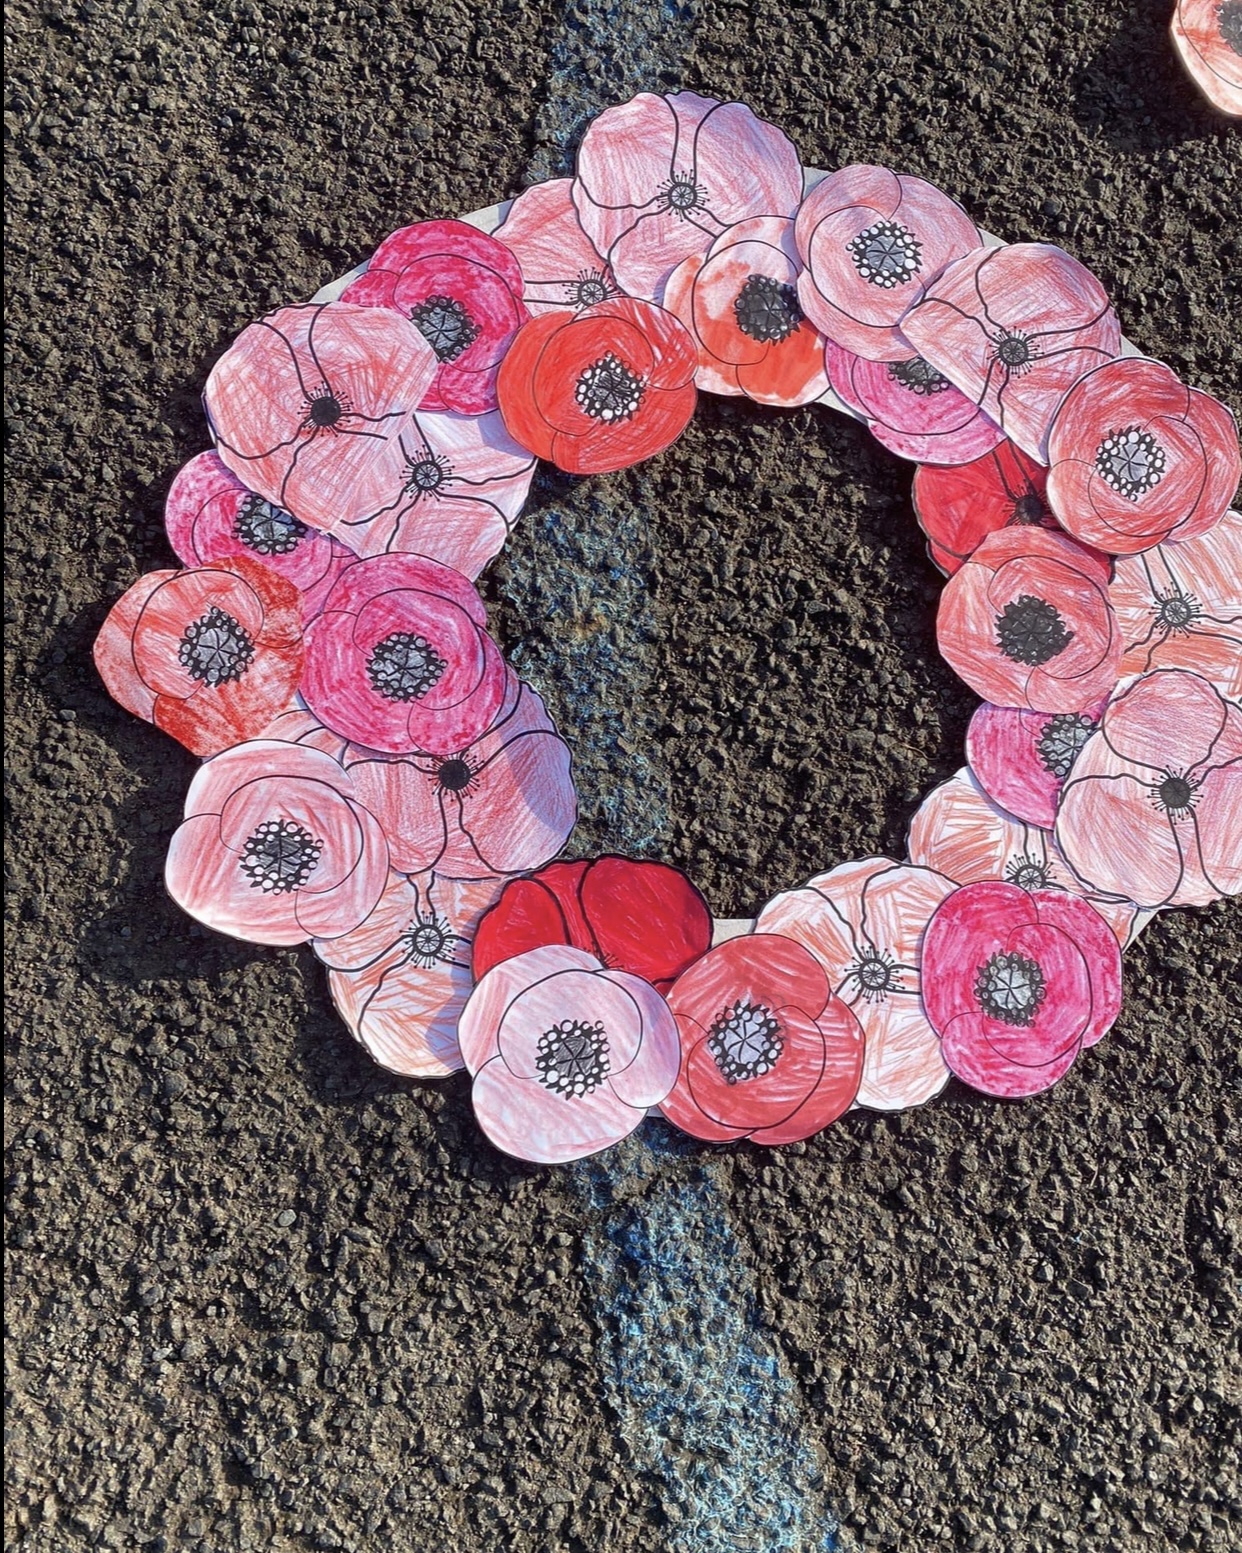 A wreath made by the children